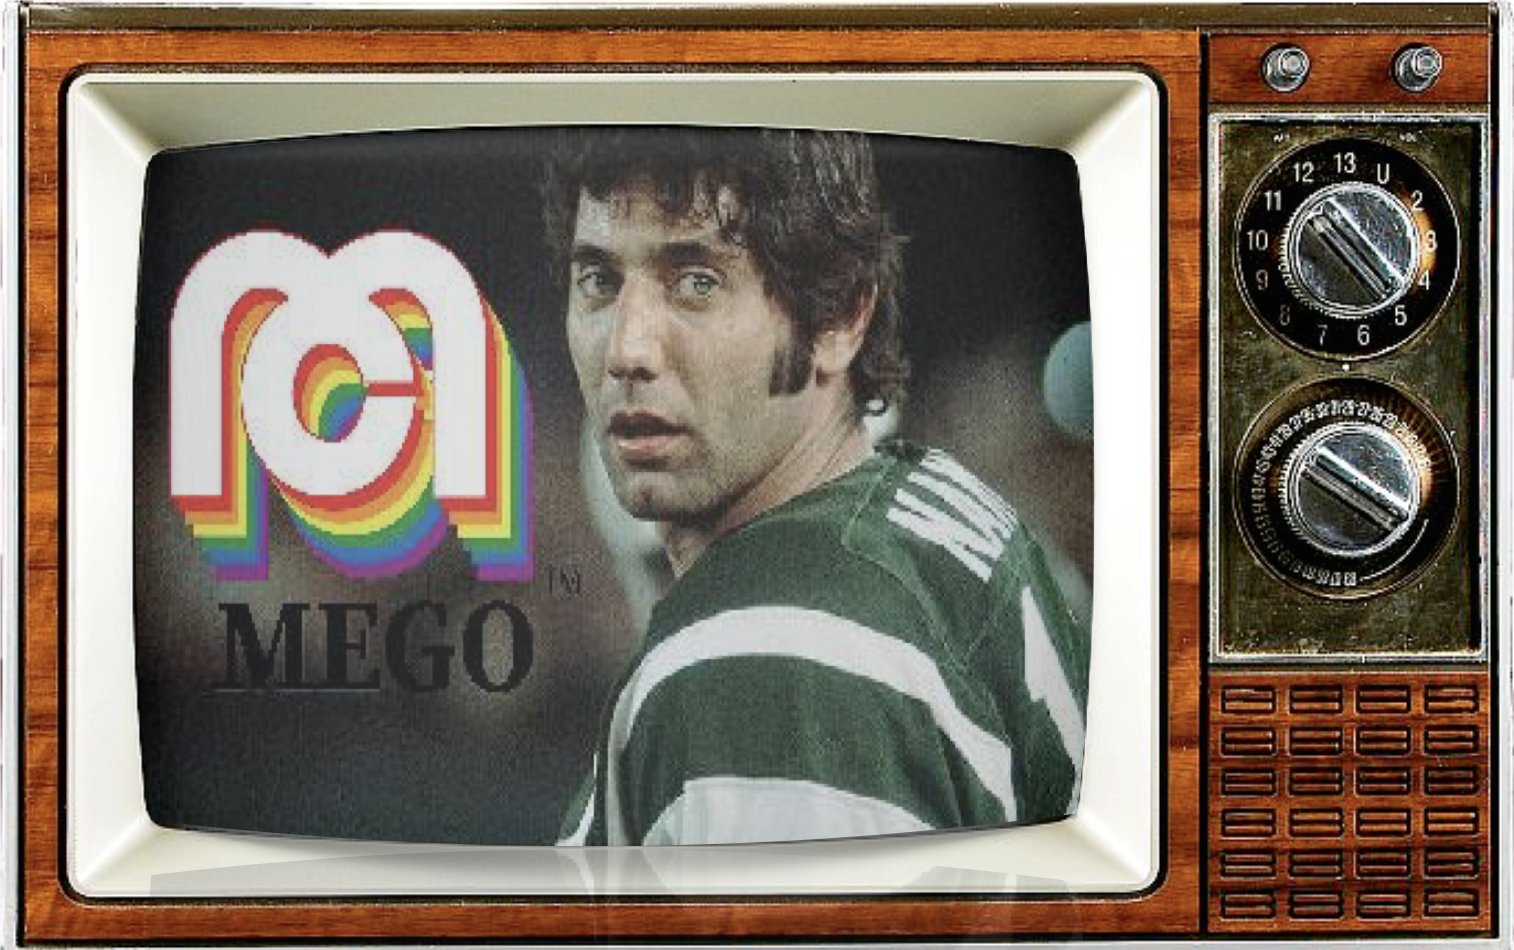 SMC Episode 77: Broadway Joe Namath -The Worlds First Action Figure- A MEGO Toy Story